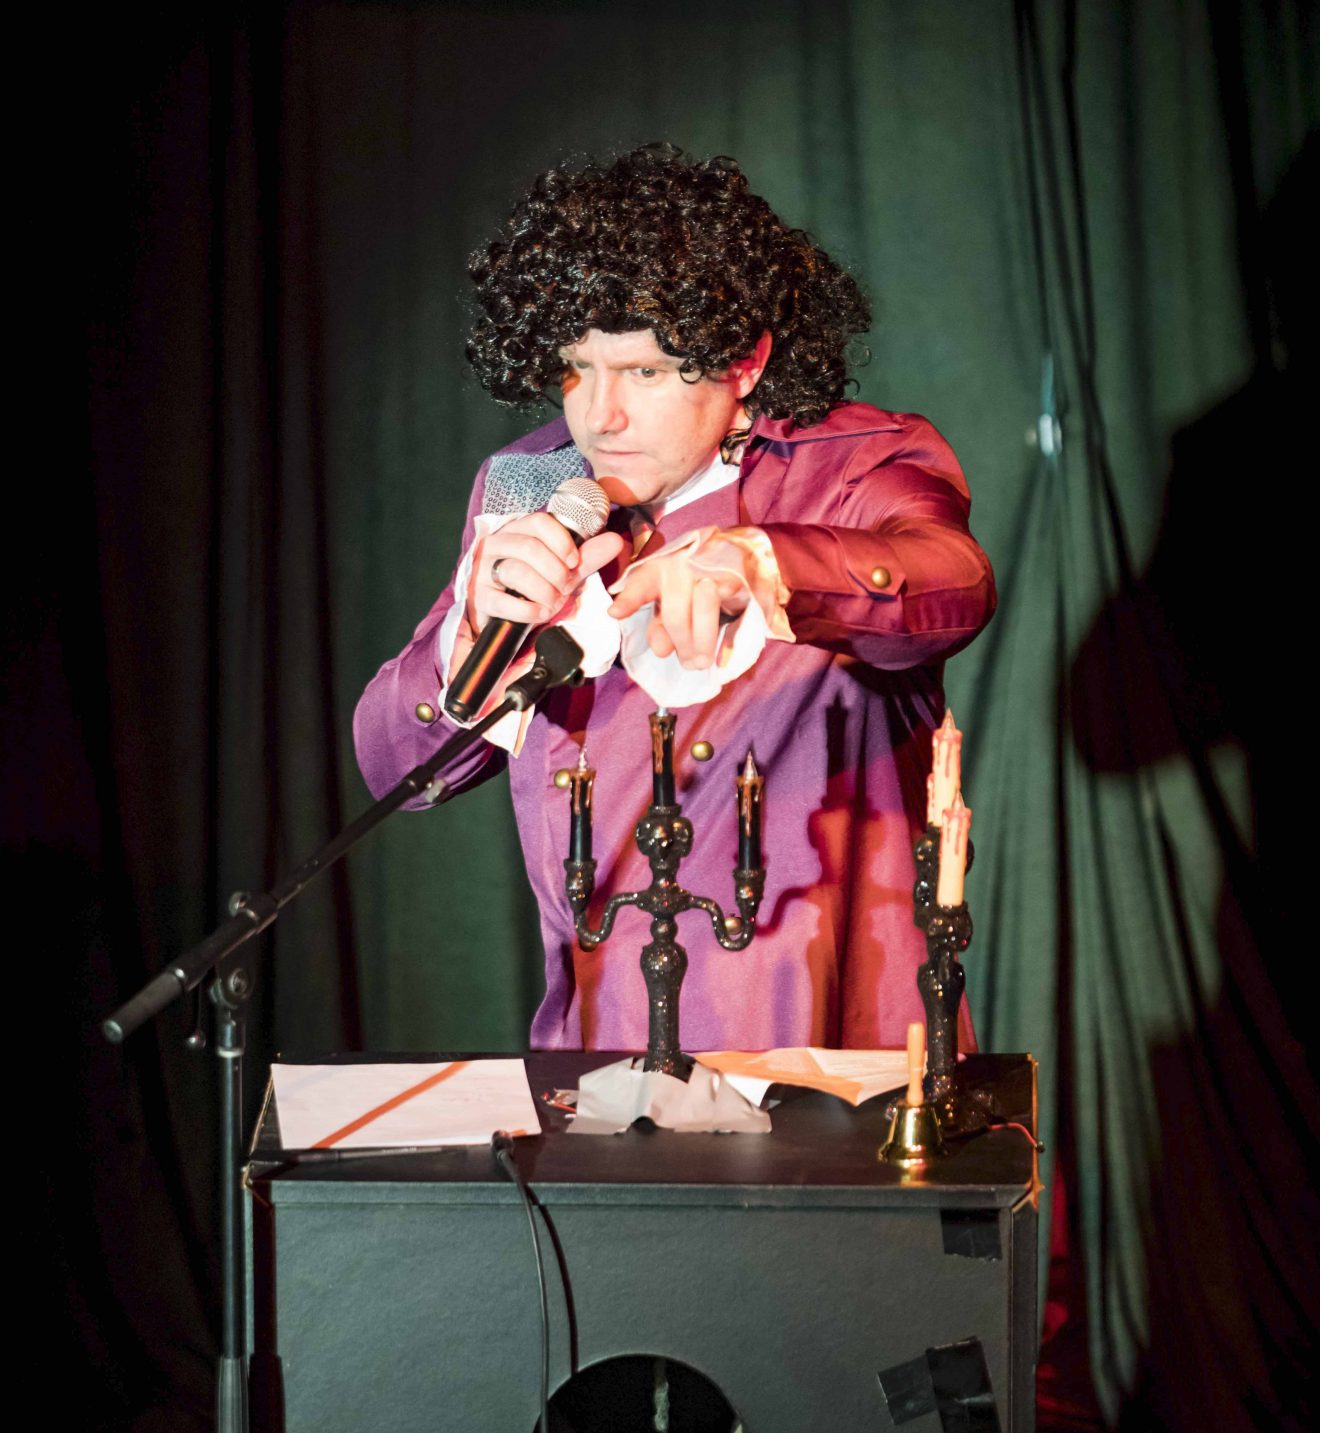 A man dressed as Prince speaks into a microphone. He is wearing a purple costume with long lace sleeves and a curly black wig.